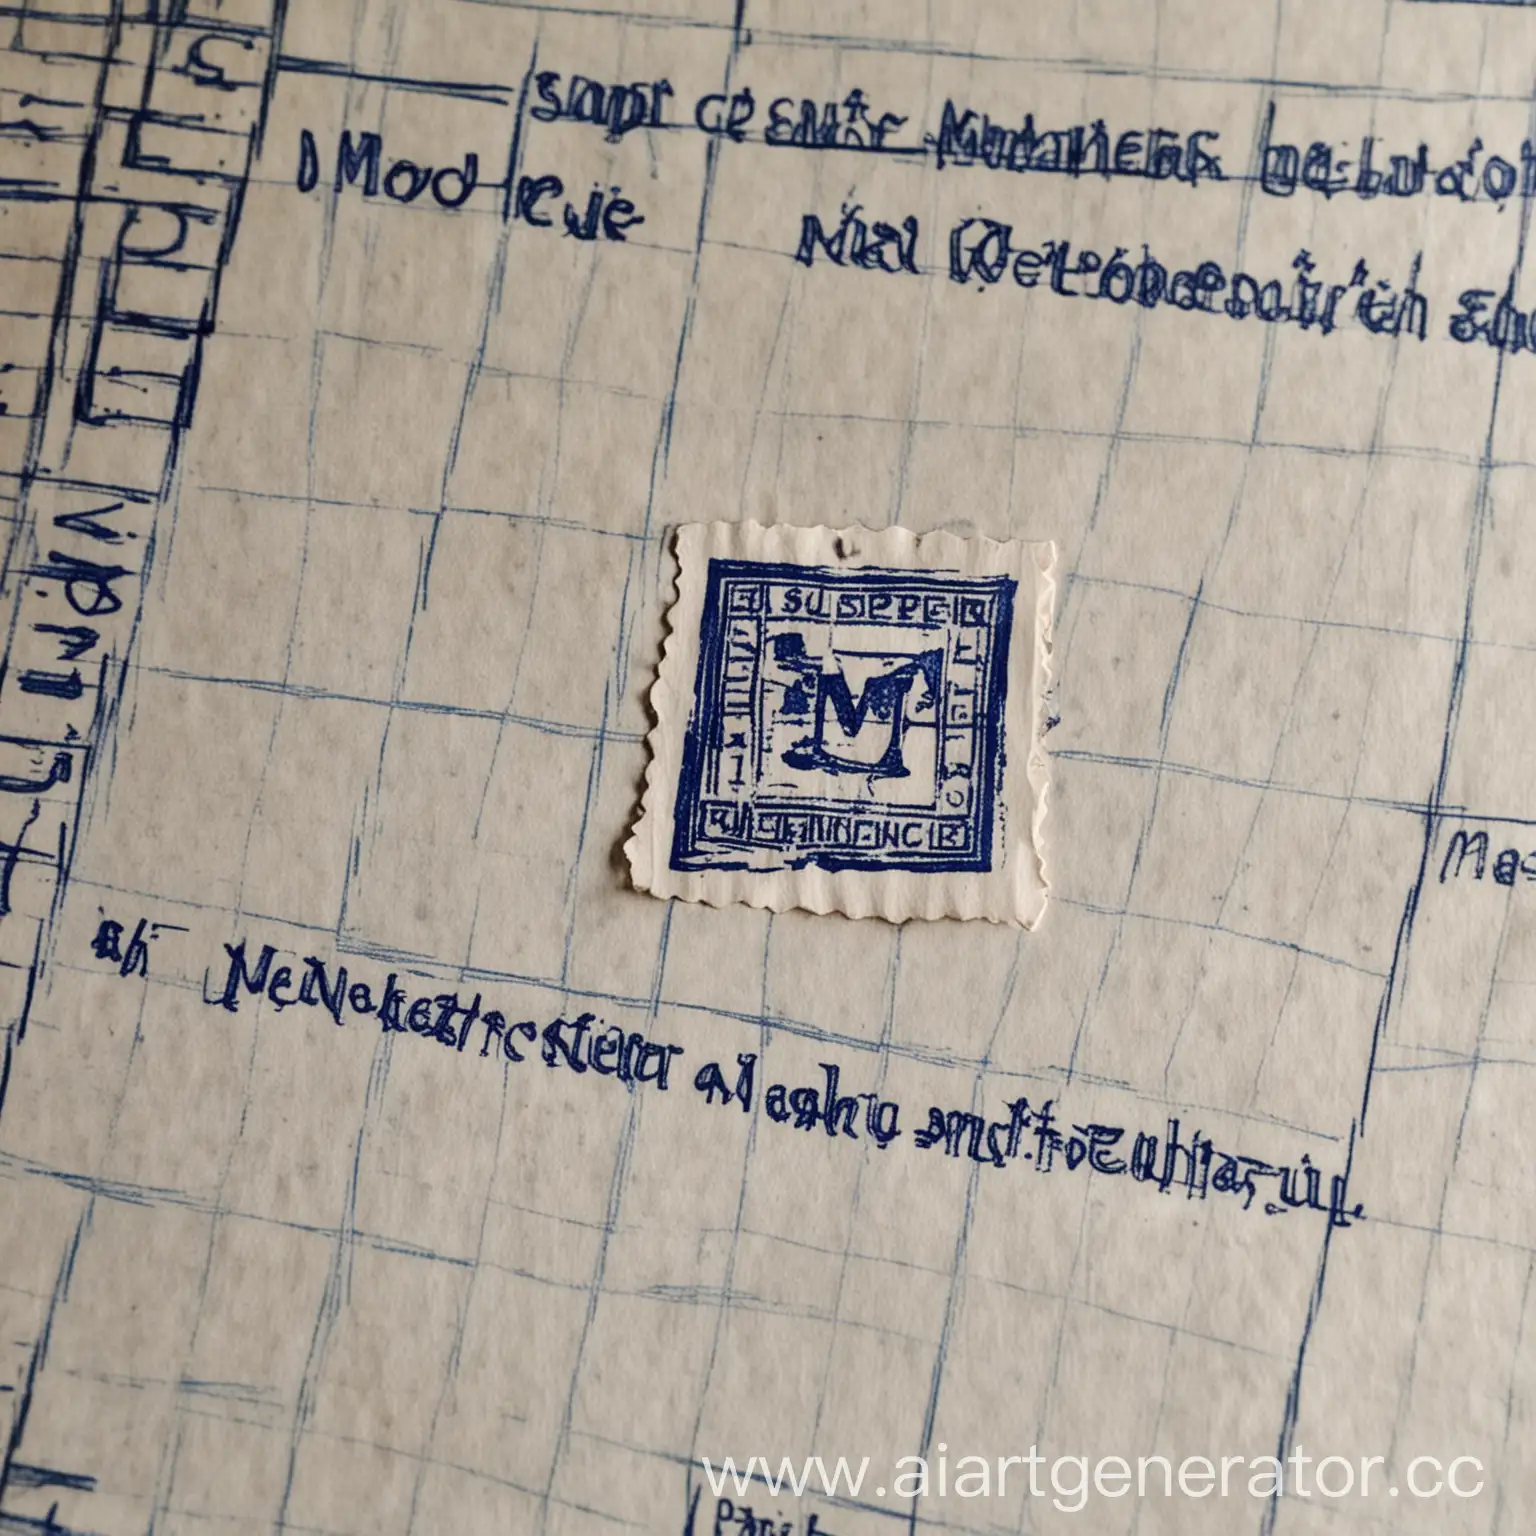 A picture of a piece of paper in a cage, on which there is a blue square stamp with the inscription "Мелокодер-Супер математик"